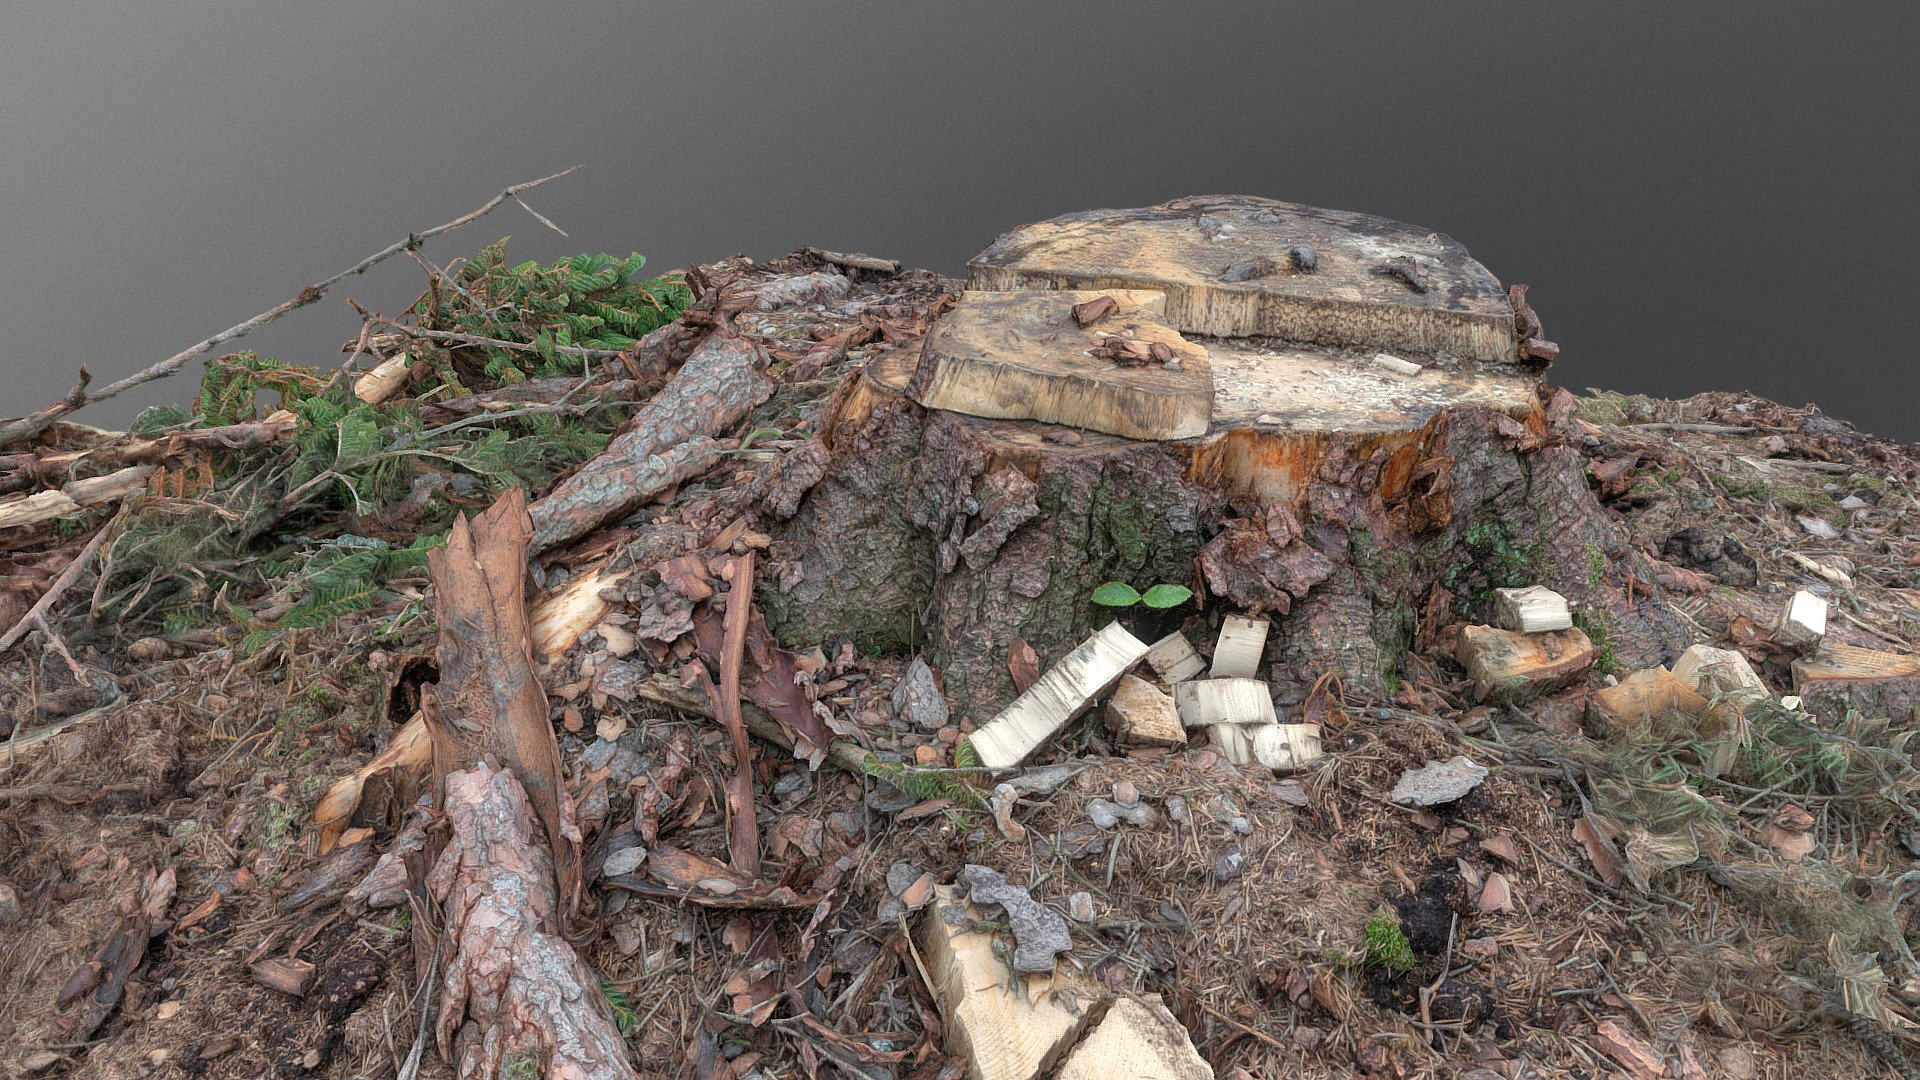 Spruce pine tree stump covered in forest clearing lumber harvesting area with fresh wood sawdust and braches, wood tree lumber timber material isolated

photogrammetry scan (150x24mp), 1x16k textures - Created in RealityCapture by Capturing Reality - Spruce tree stump - Download Free 3D model by matousekfoto 3d model